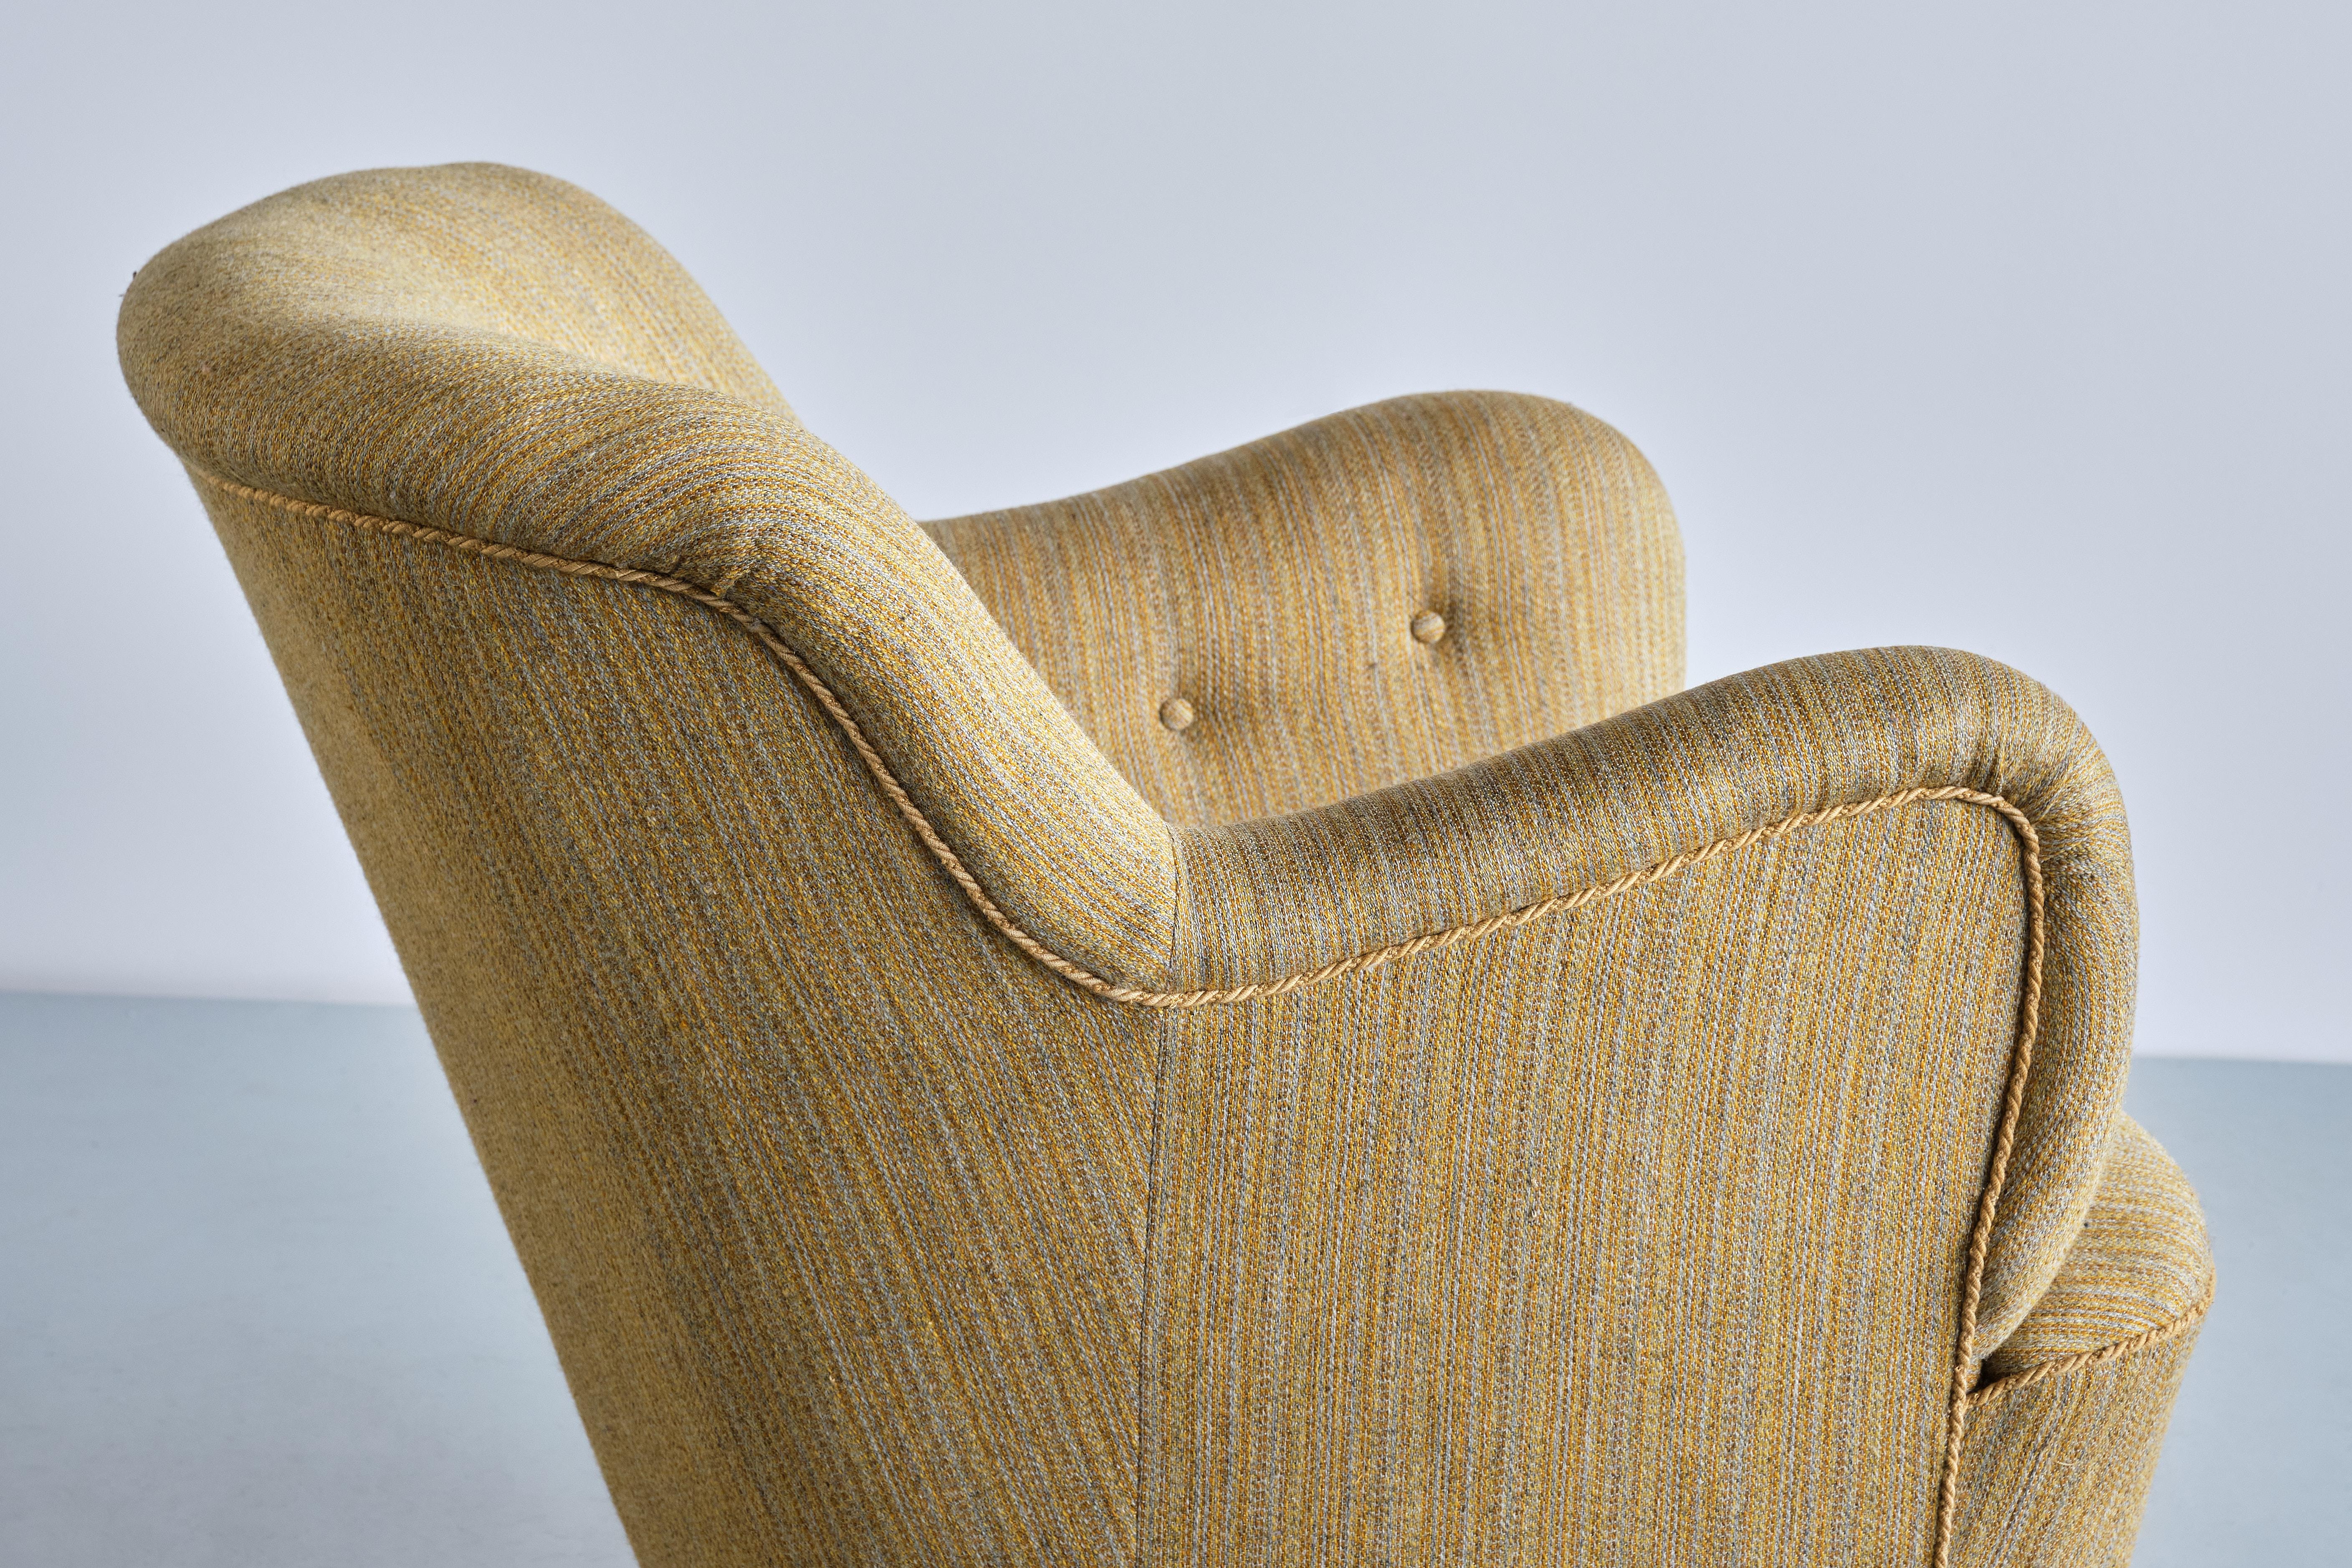 Sculptural Pair of Gustav Axel Berg Armchairs in Beech and Wool, Sweden, 1940s For Sale 5